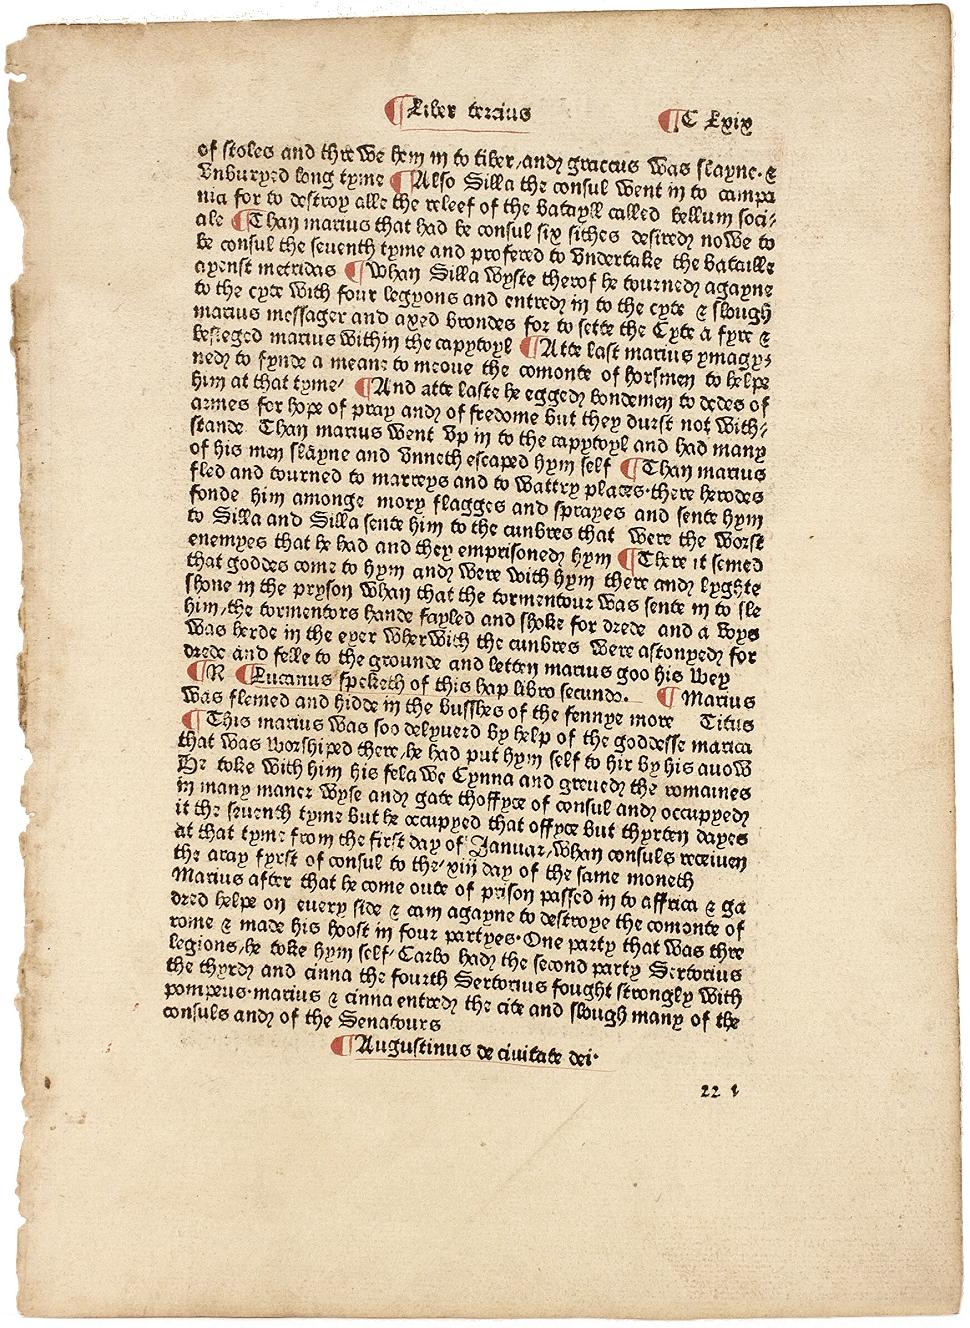 British William Caxton, A Leaf from the Polycronicon, 1482, First Printing in English